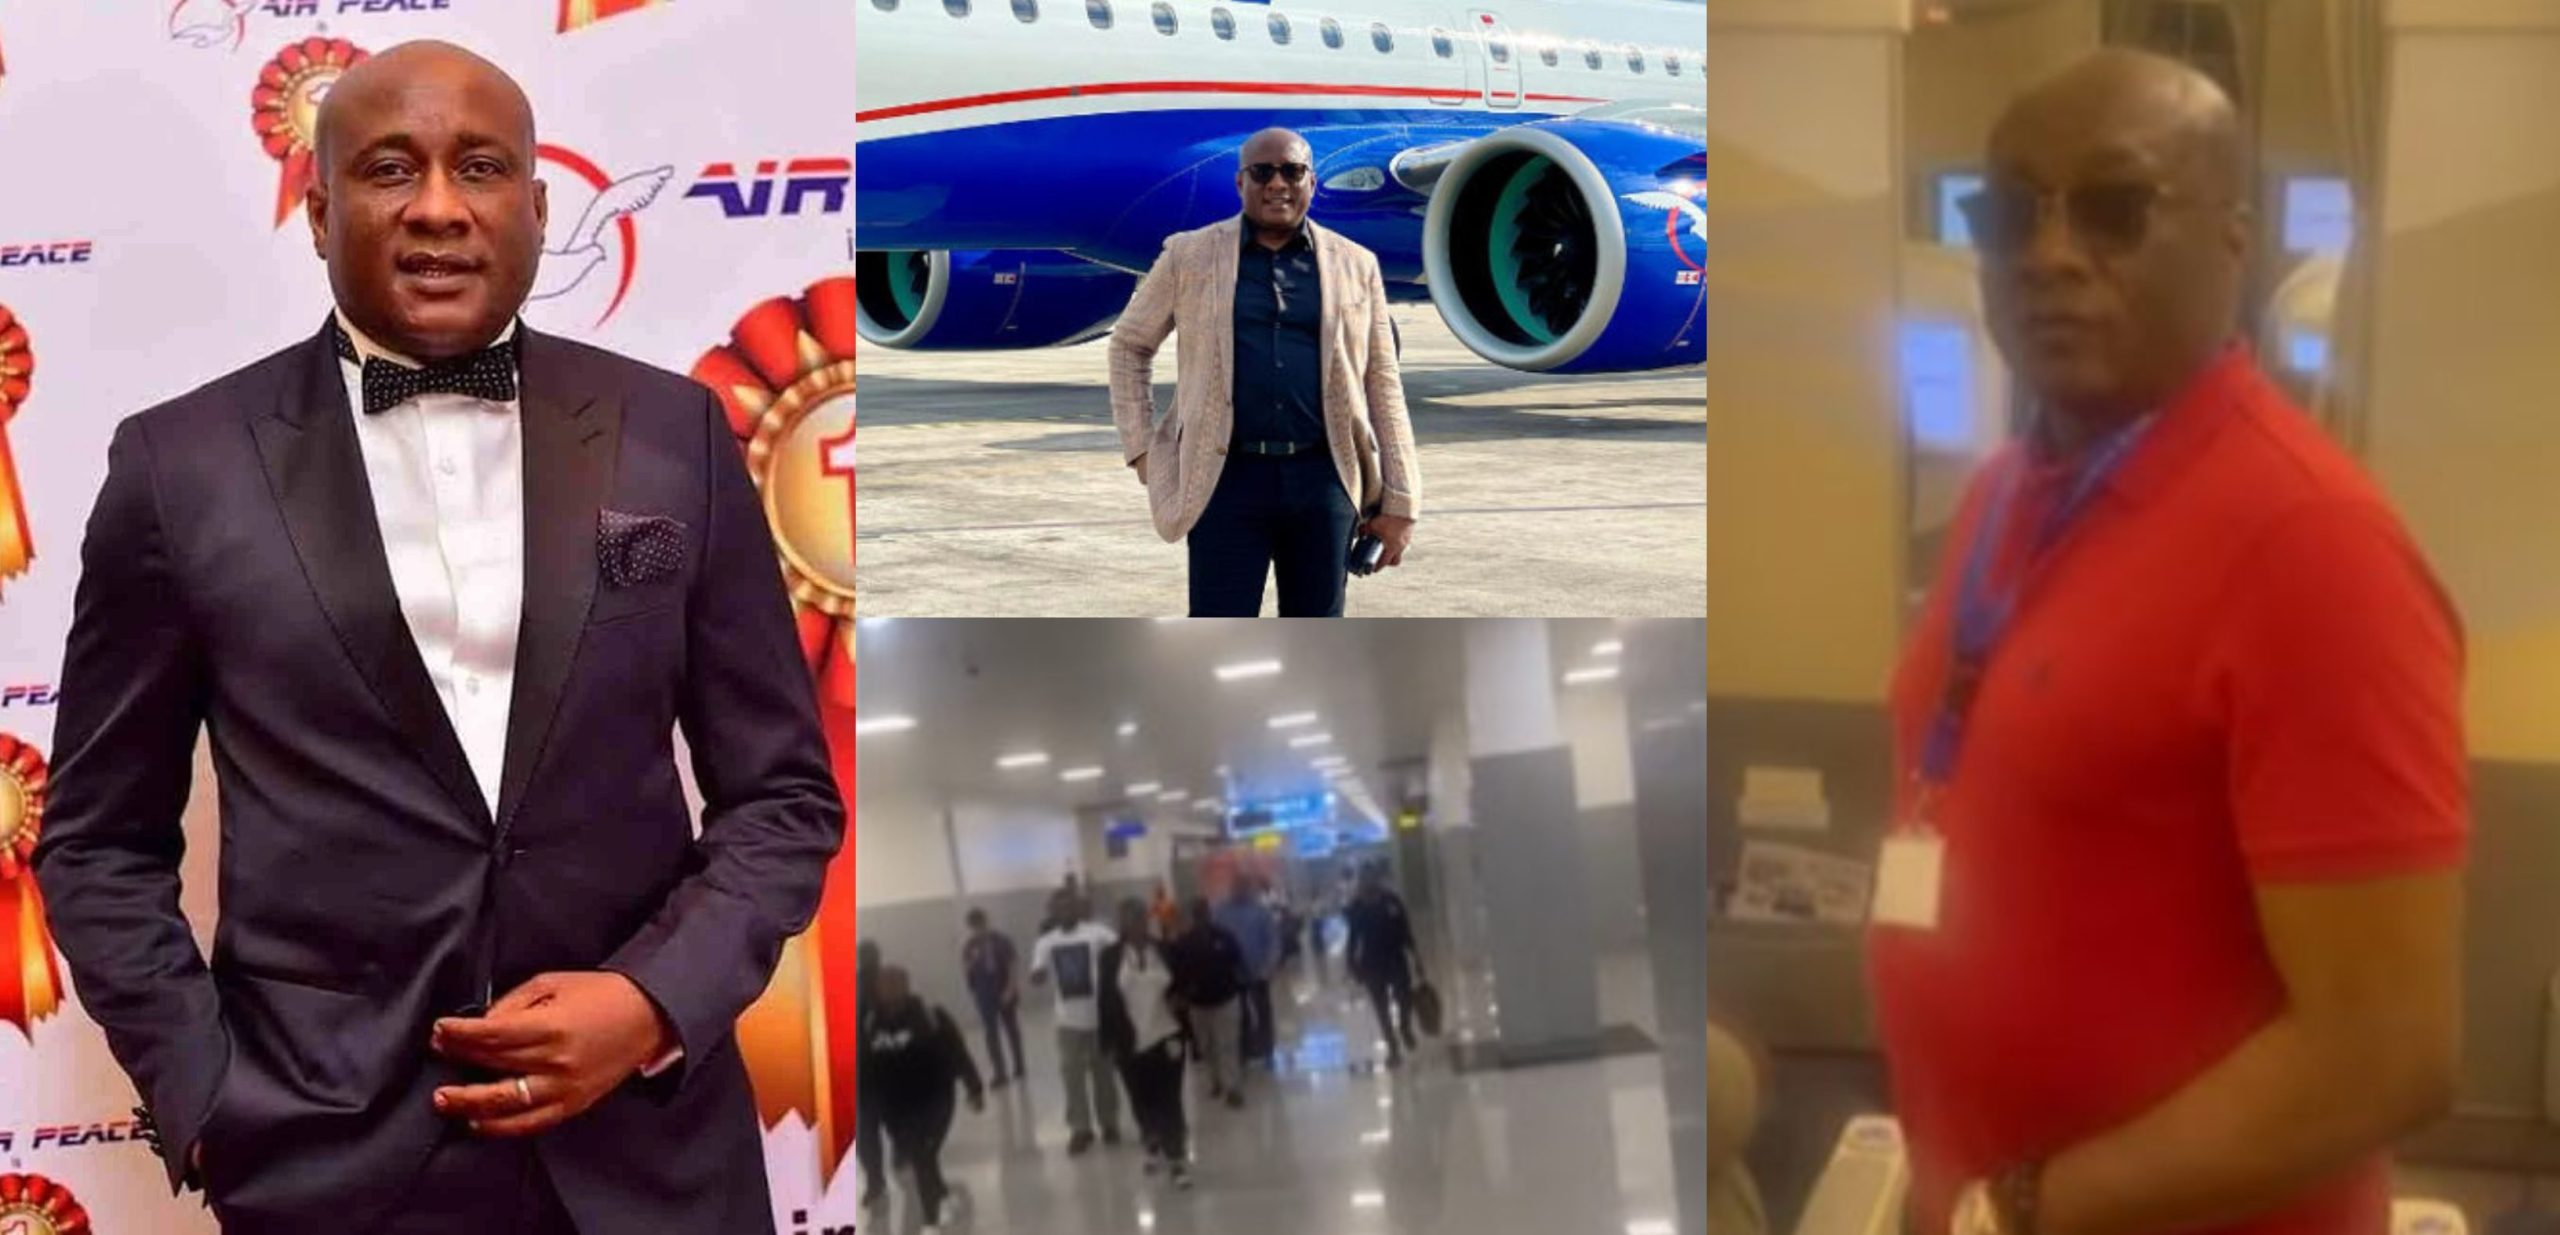 Air Peace CEO Allen Onyema spotted leading passengers to a flight days after reducing Lagos to London price ticket from N9M-N900K